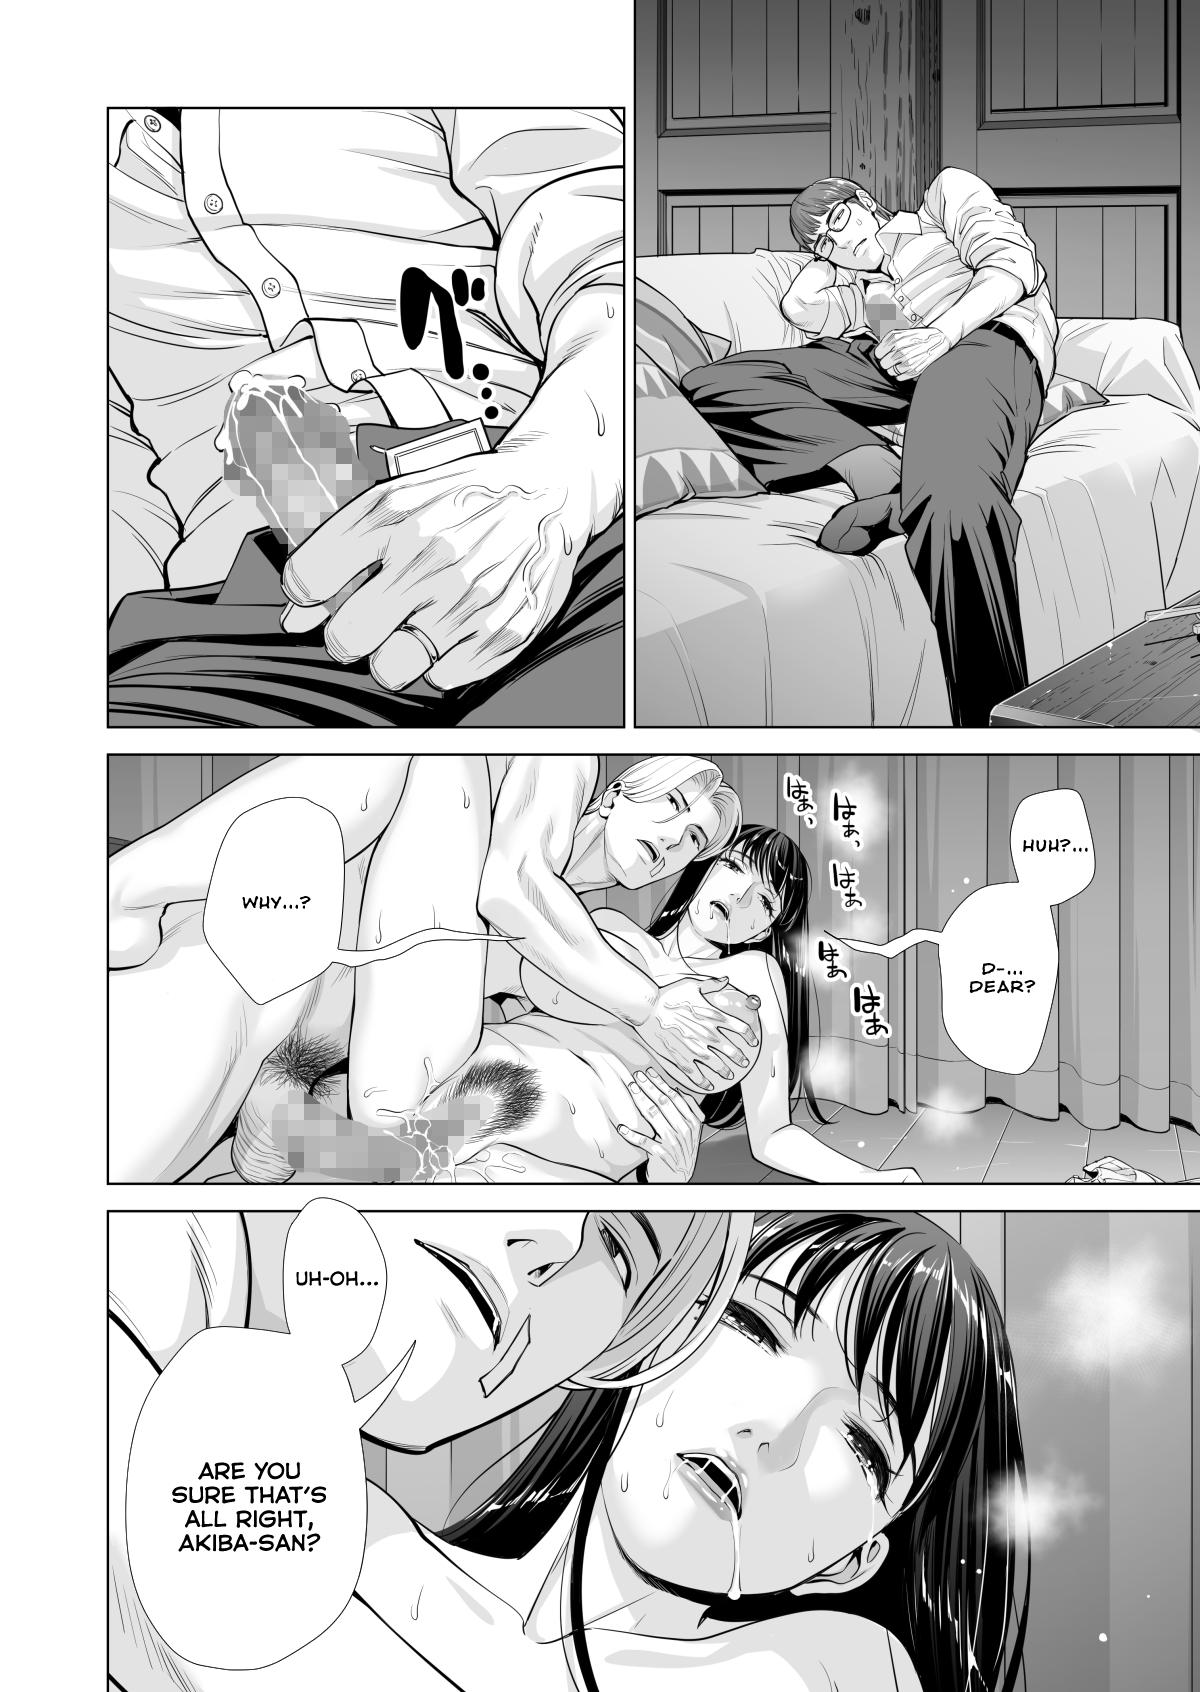 [HGT Lab (Tsusauto)] Tsukiyo no Midare Zake (Kouhen) Moonlit Intoxication ~ A Housewife Stolen by a Coworker Besides her Blackout Drunk Husband ~ Chapter 2 [English] 42